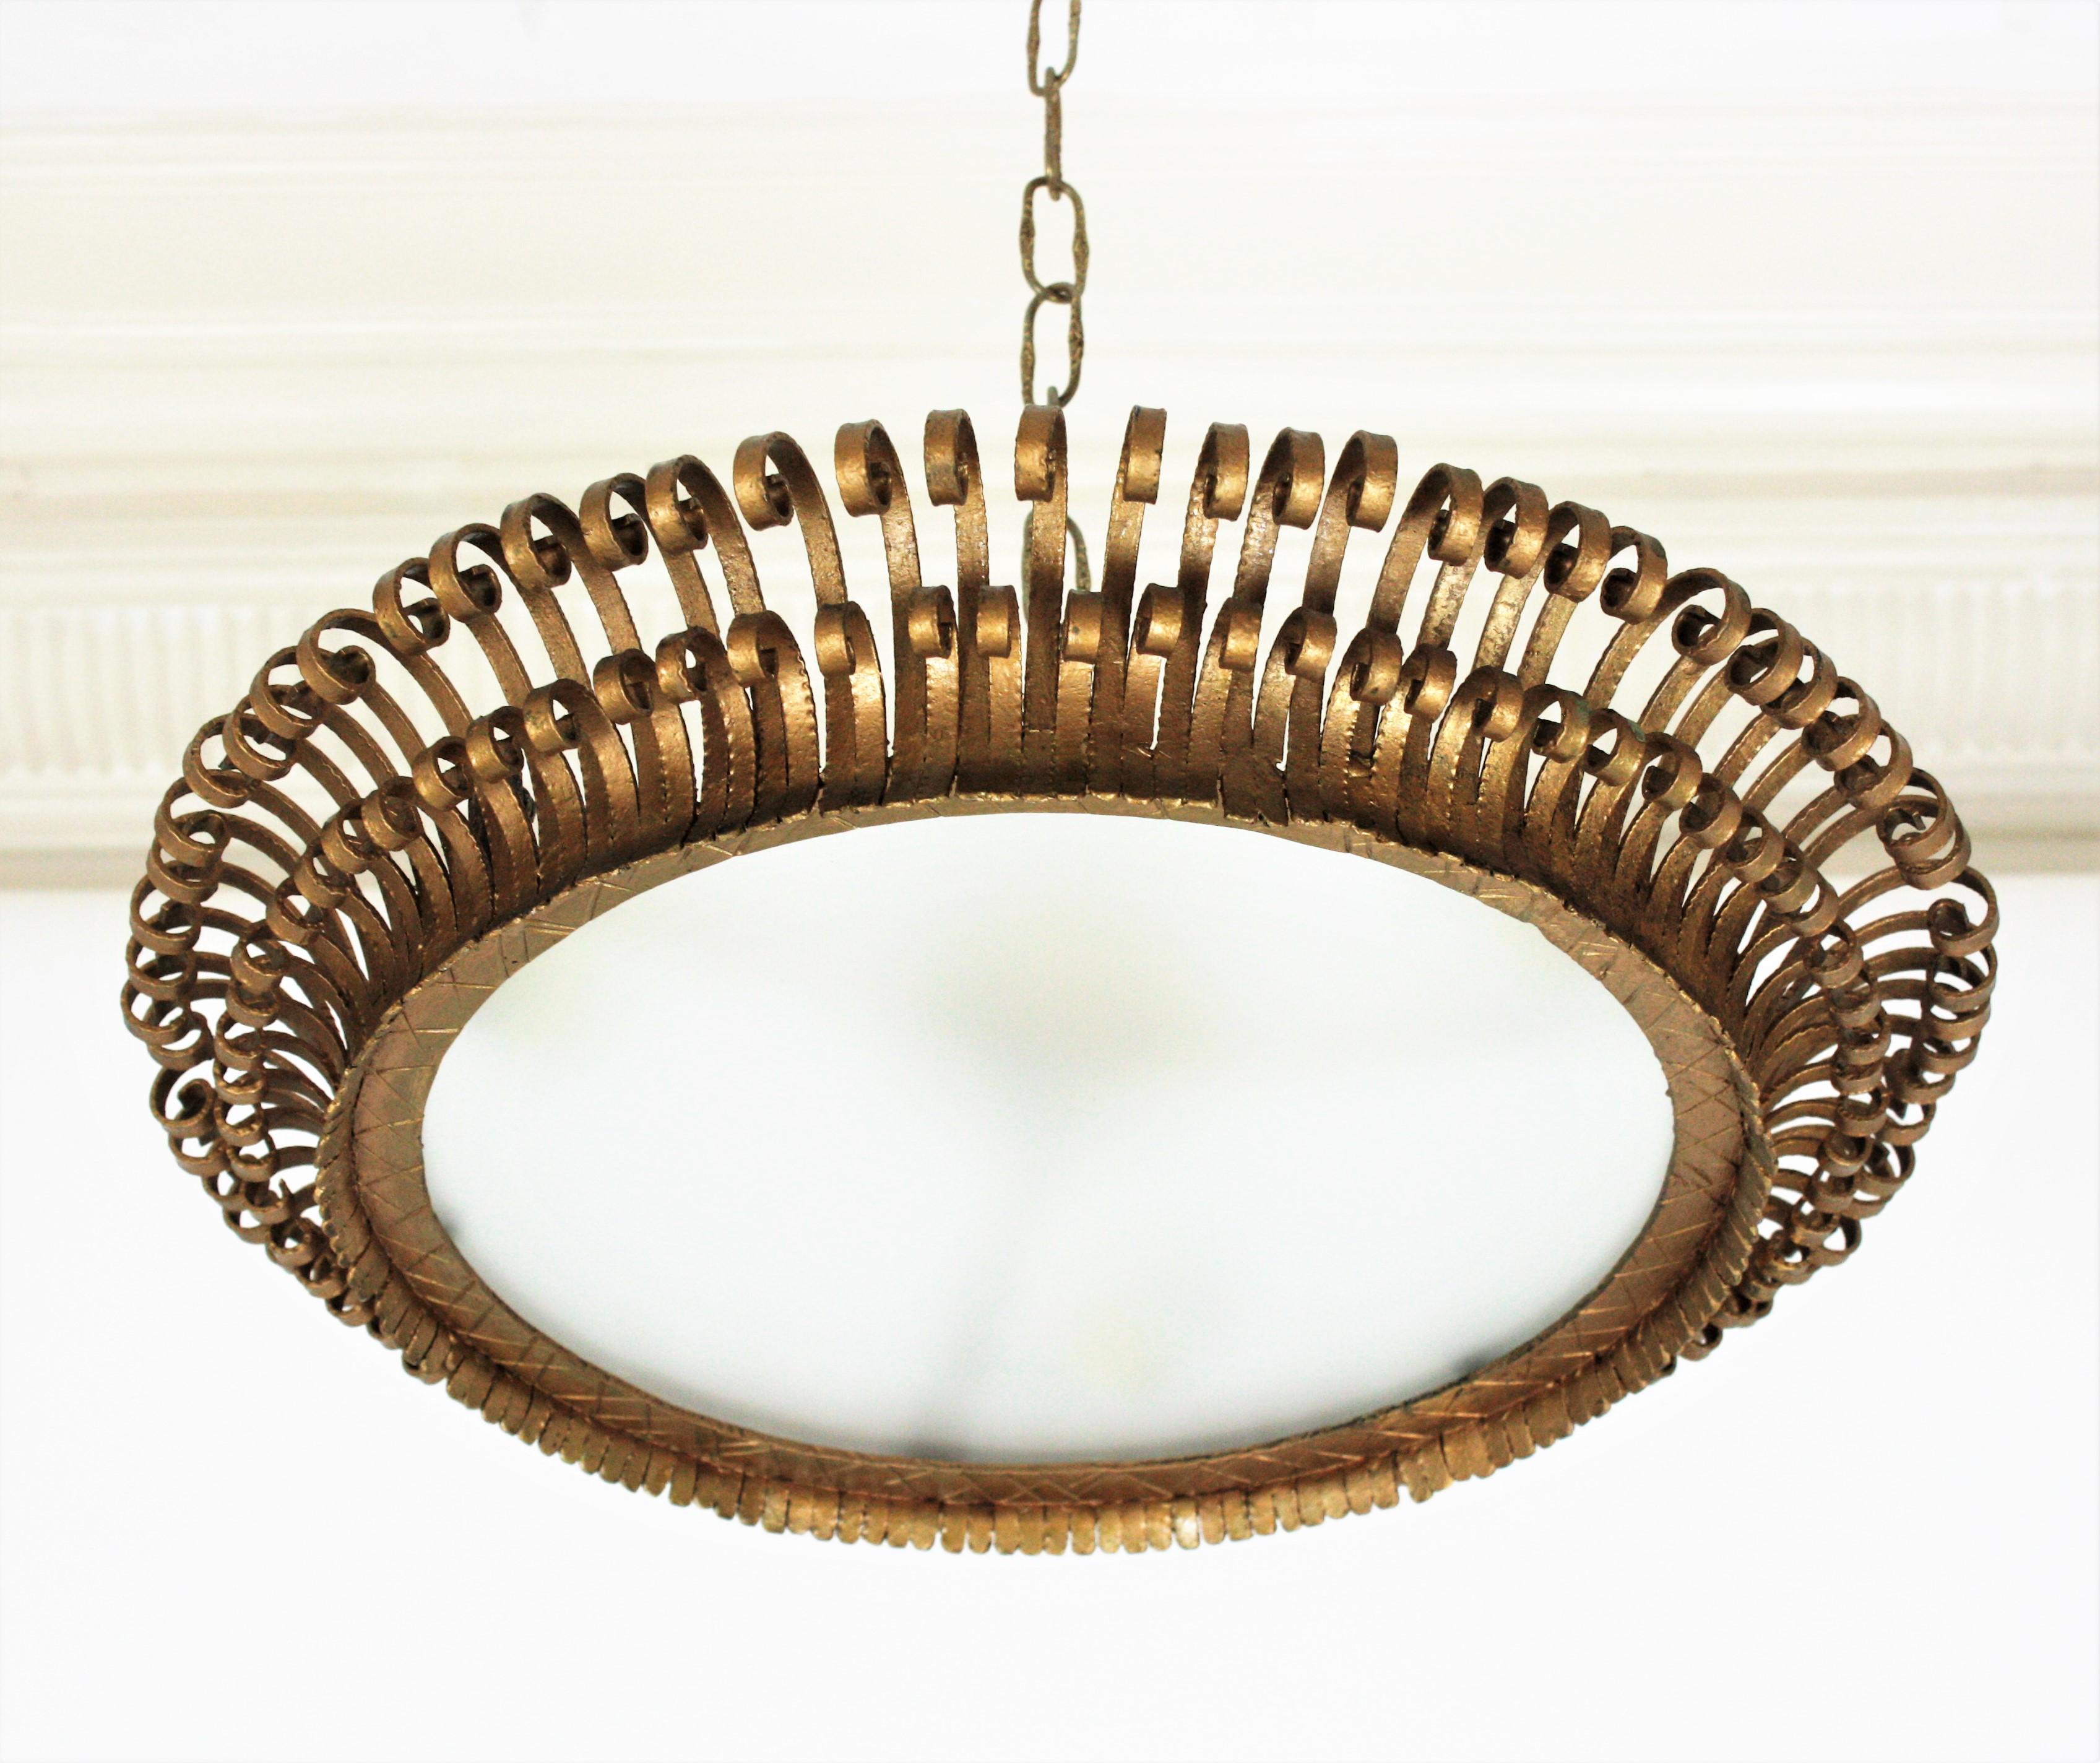 Eye-catching double layered gilt iron sunburst round flushmount with eyelash scroll endings. Spain, 1950s
The frame is made by a double layer of curved beams with scrolled endings. The frosted glass diffuser allows to disperse a good amount of